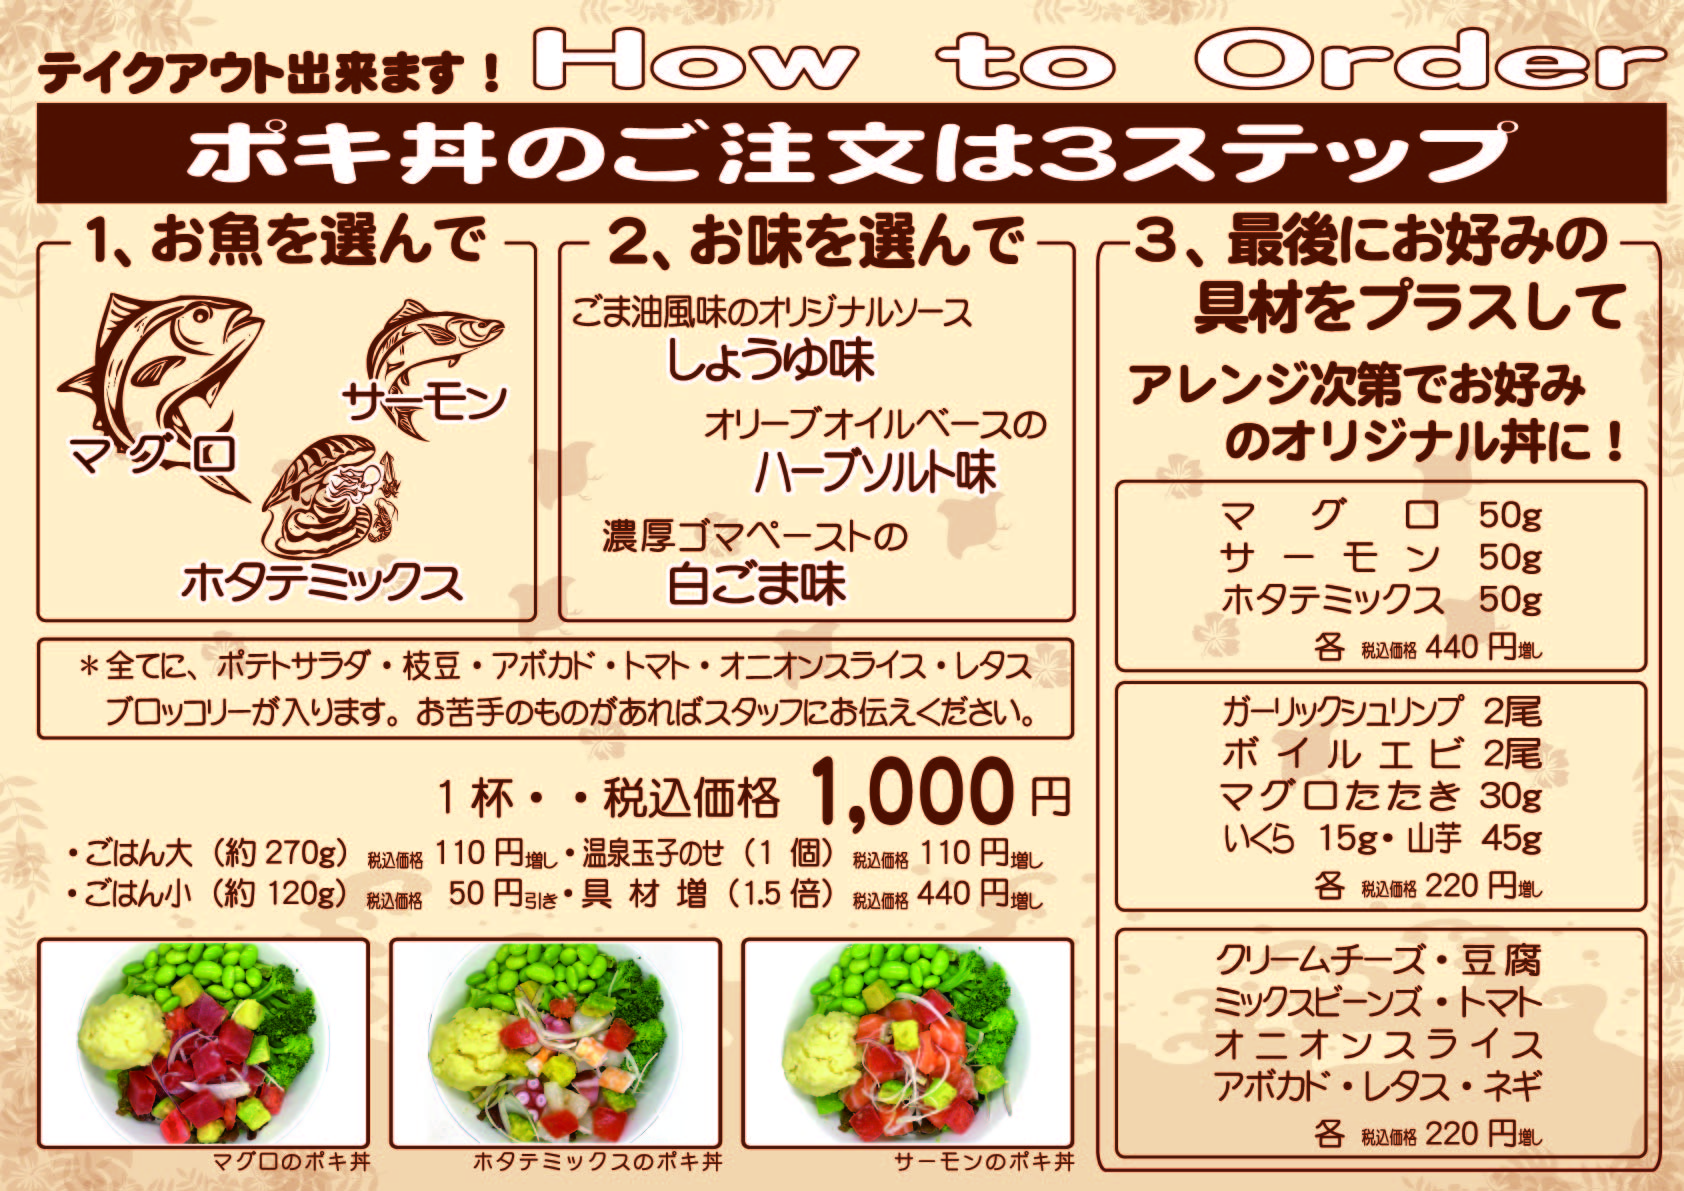 A2ポキ丼（Howto）